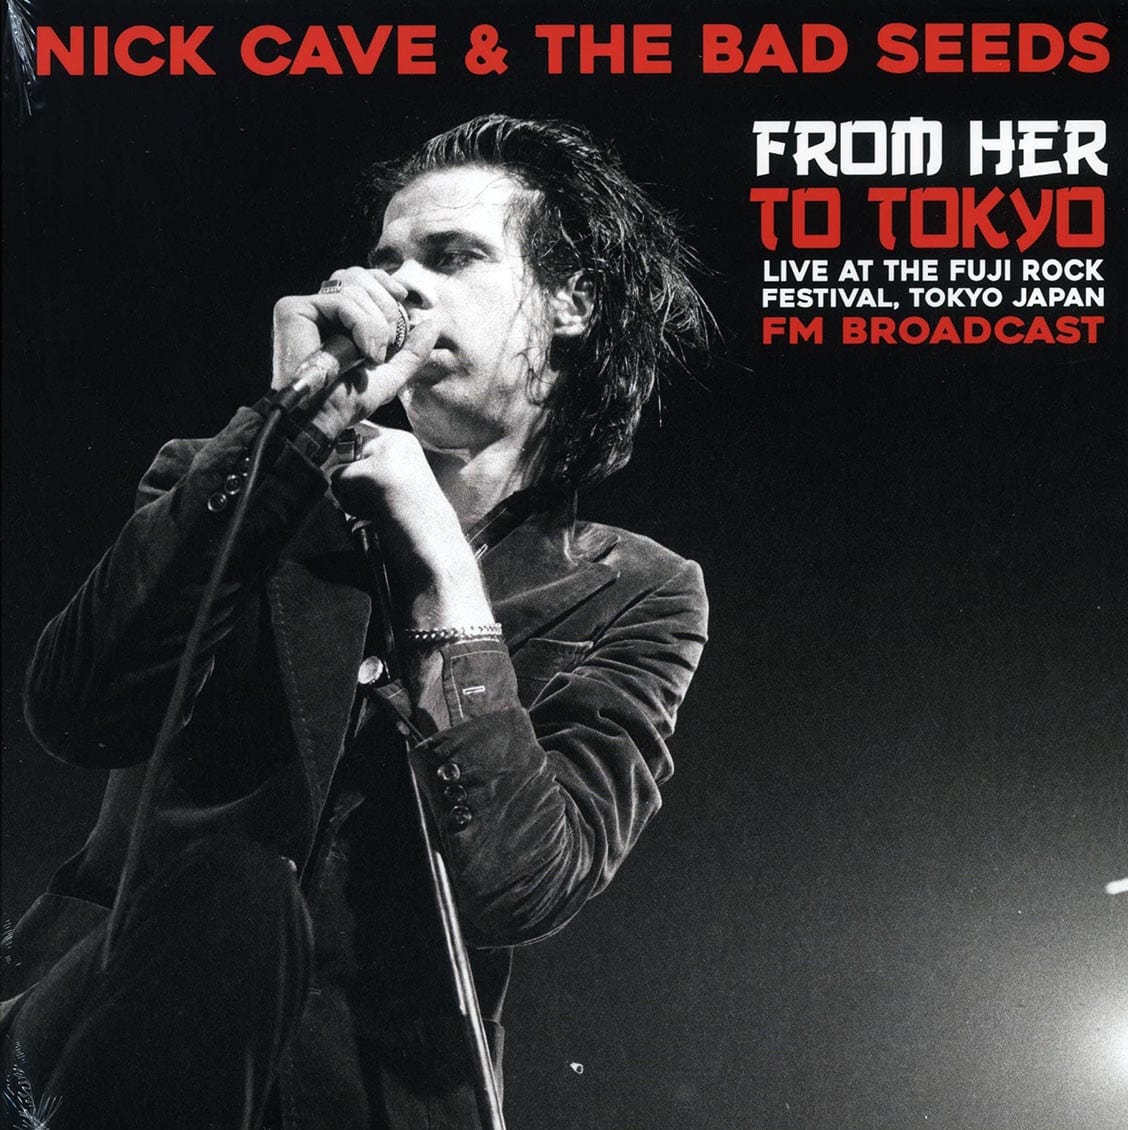 NICK CAVE & THE BAD SEEDS: From Her To Tokyo • Live At The Fuji Rock Festival, Tokyo Japan FM Broadcast (Ltd. 500 Copies) LP